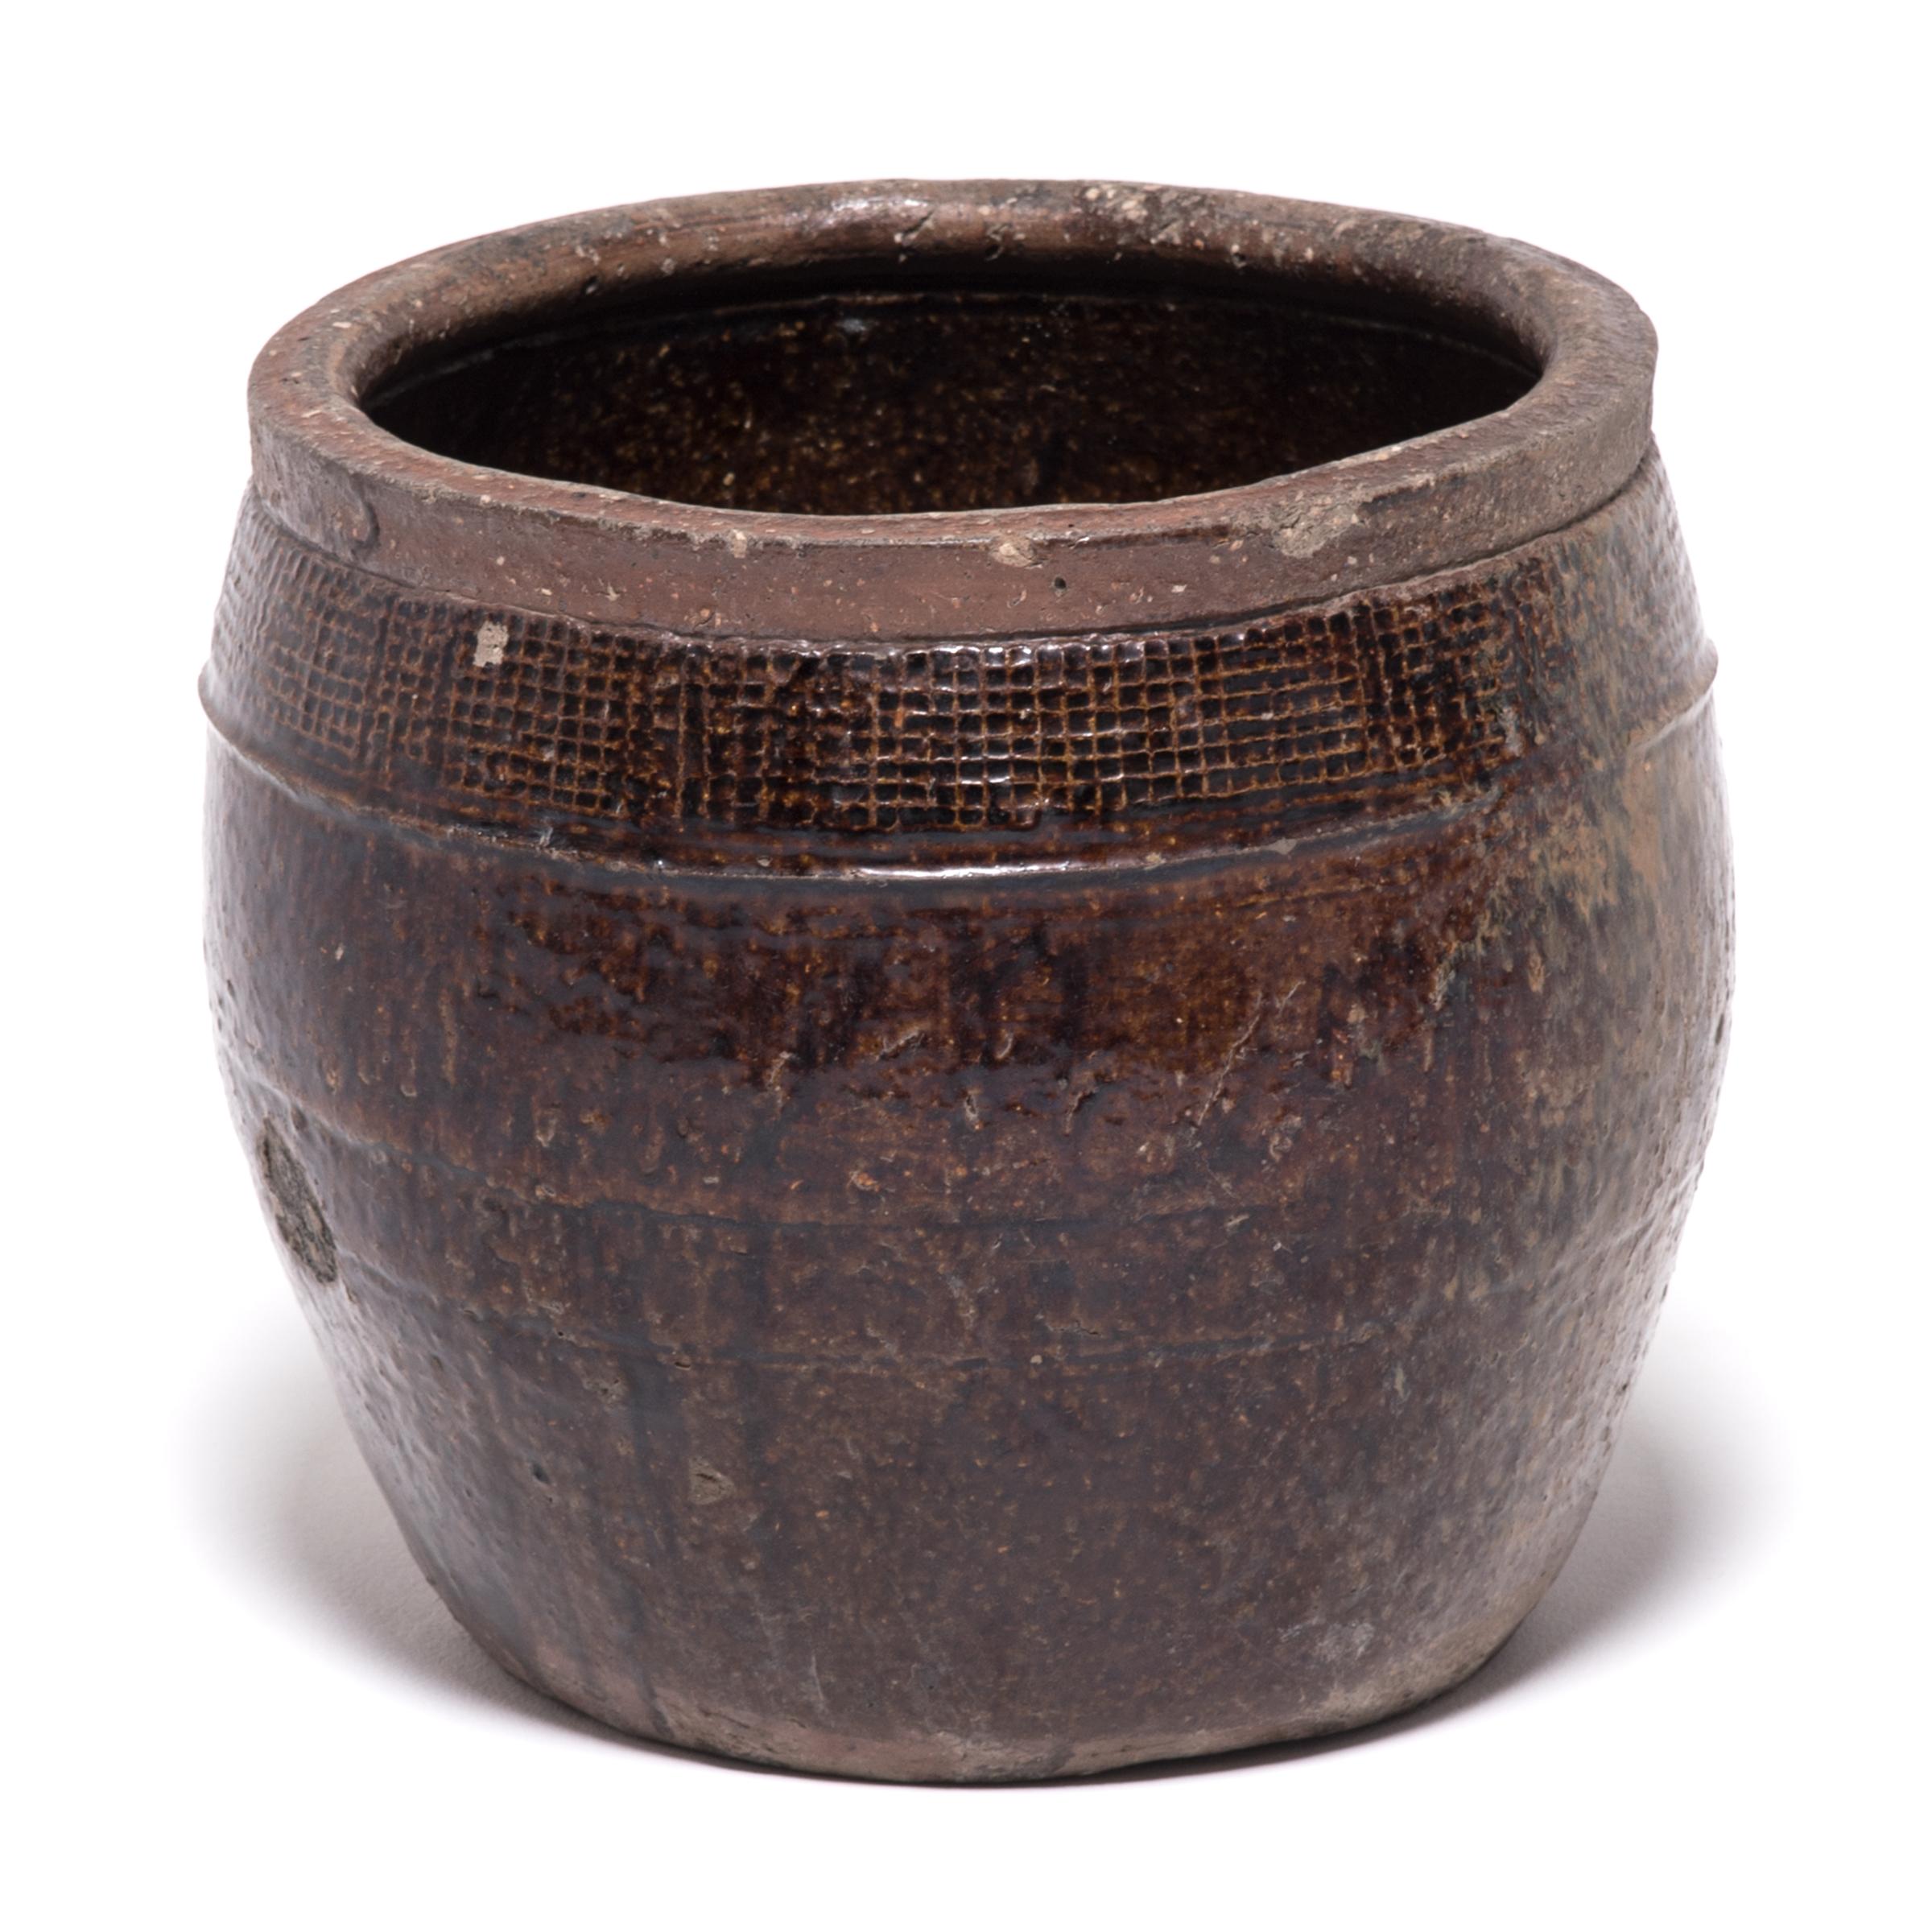 The potter who crafted this large, wide-mouthed jar in Beijing used contrasting textures to add interest to the vessel’s simple barrel shape. Small grids incised just under the unglazed rim draw the eye to the upper portion, while the free